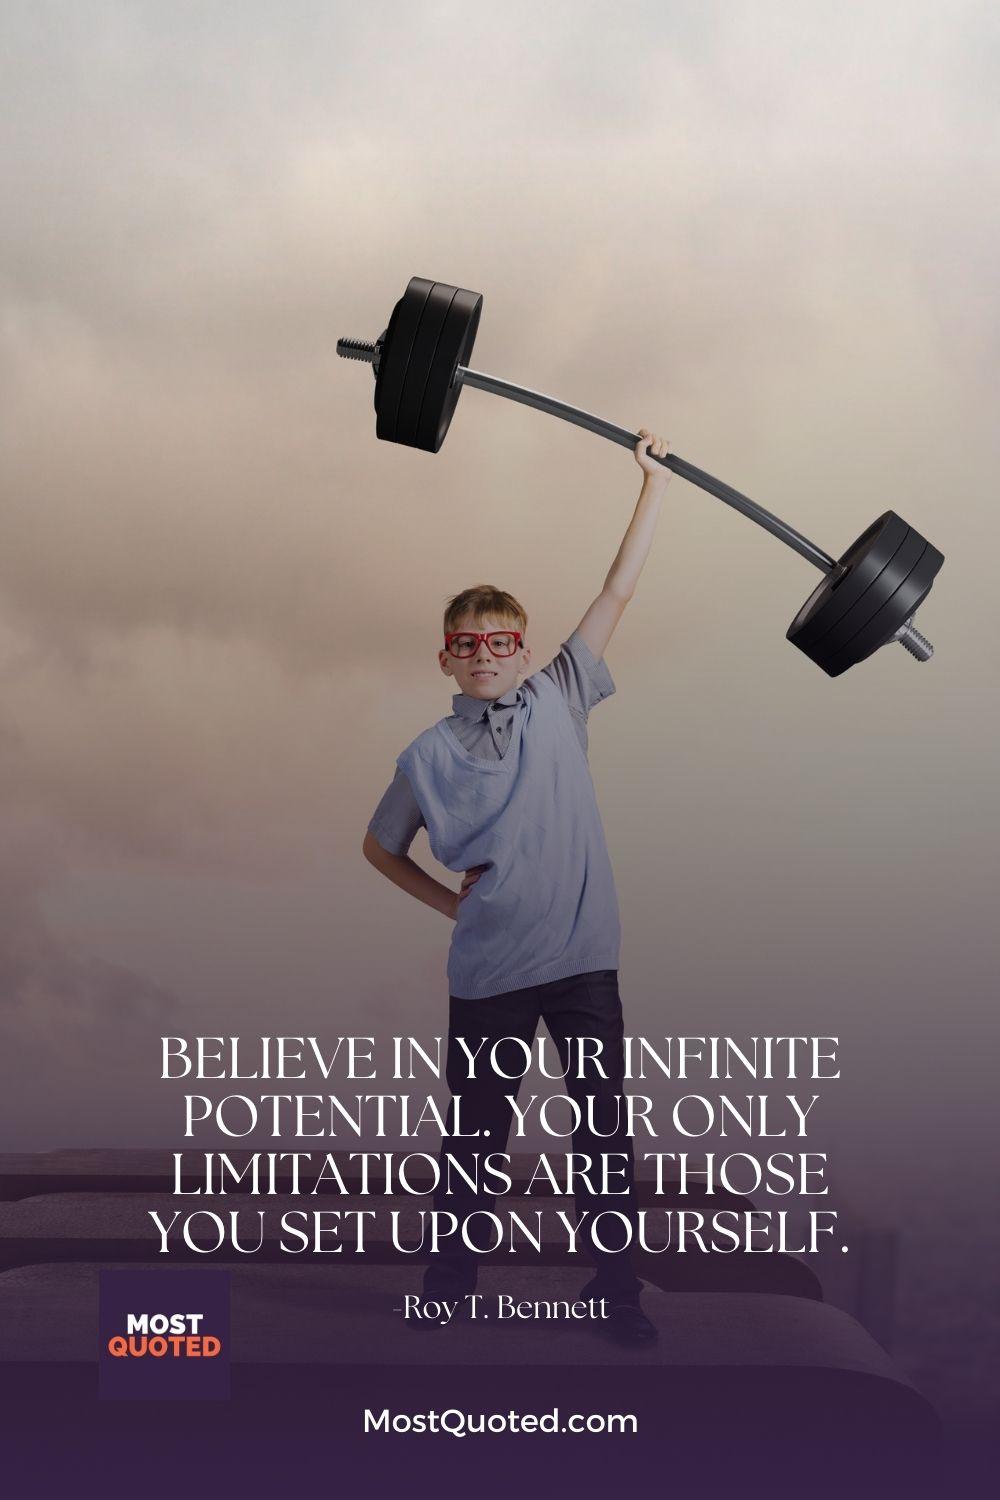 Believe in your infinite potential. Your only limitations are those you set upon yourself. - Roy T. Bennett